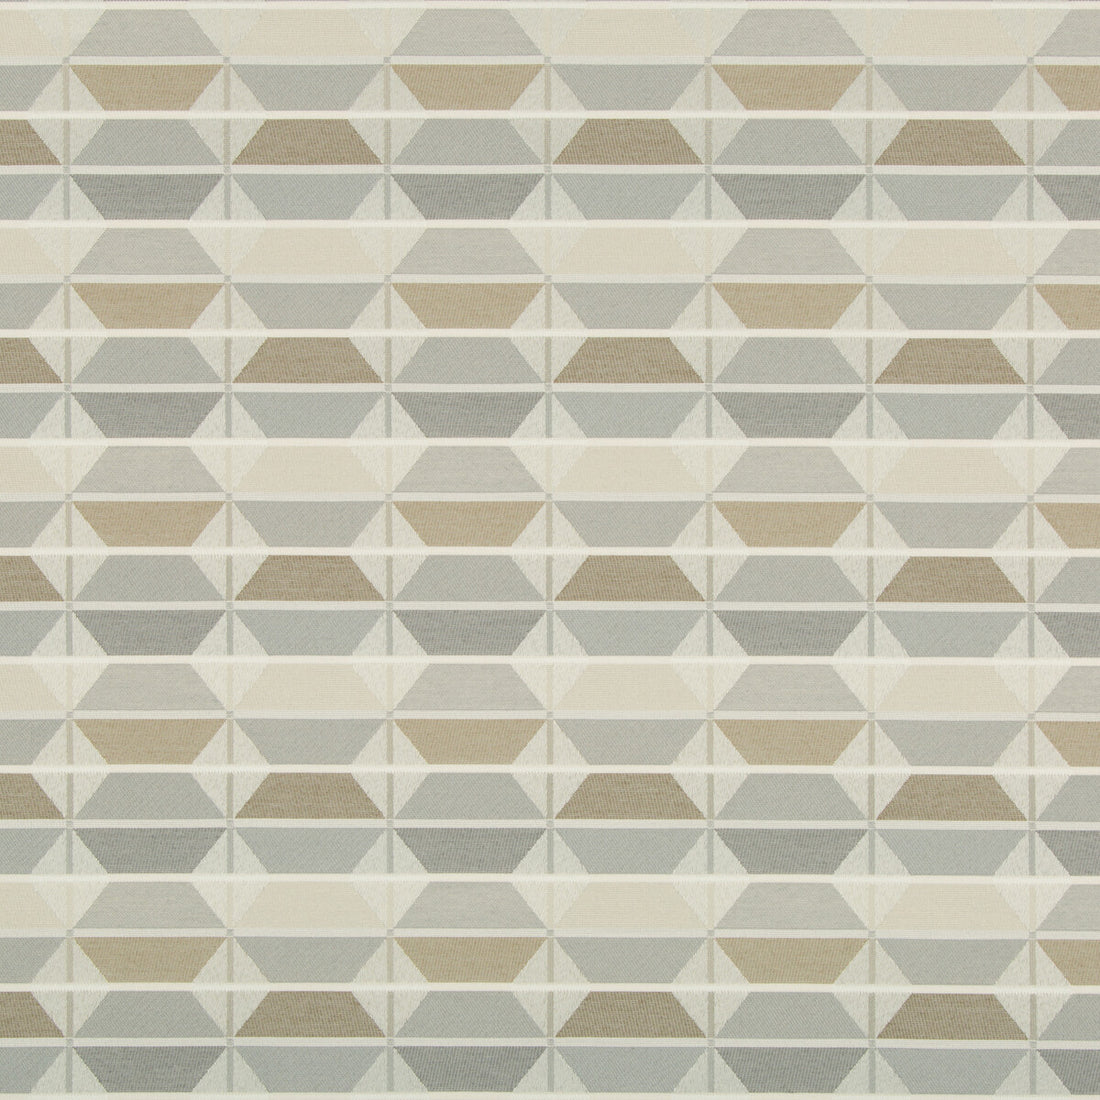 Format fabric in river rock color - pattern 35094.1611.0 - by Kravet Contract in the Gis Crypton collection